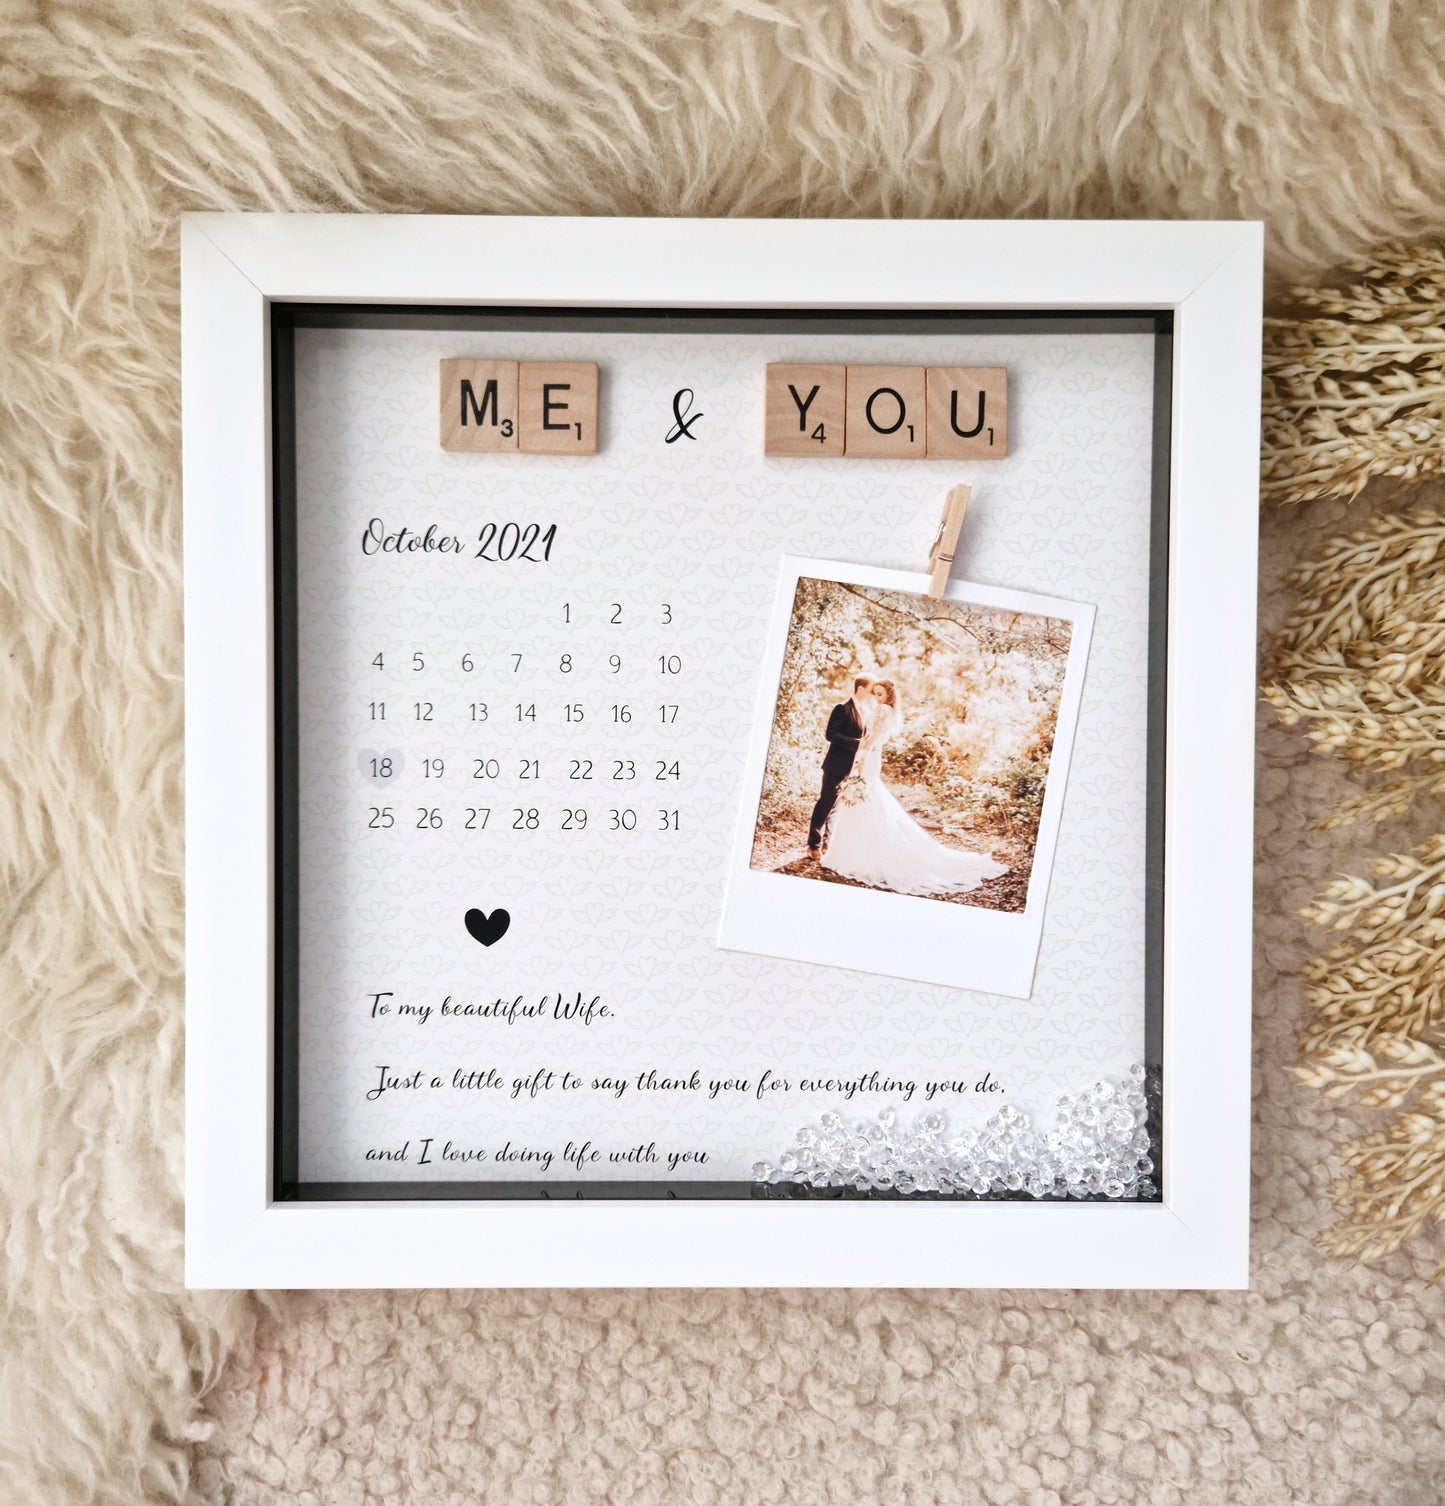 Personalised Valentine's Photo Gifts